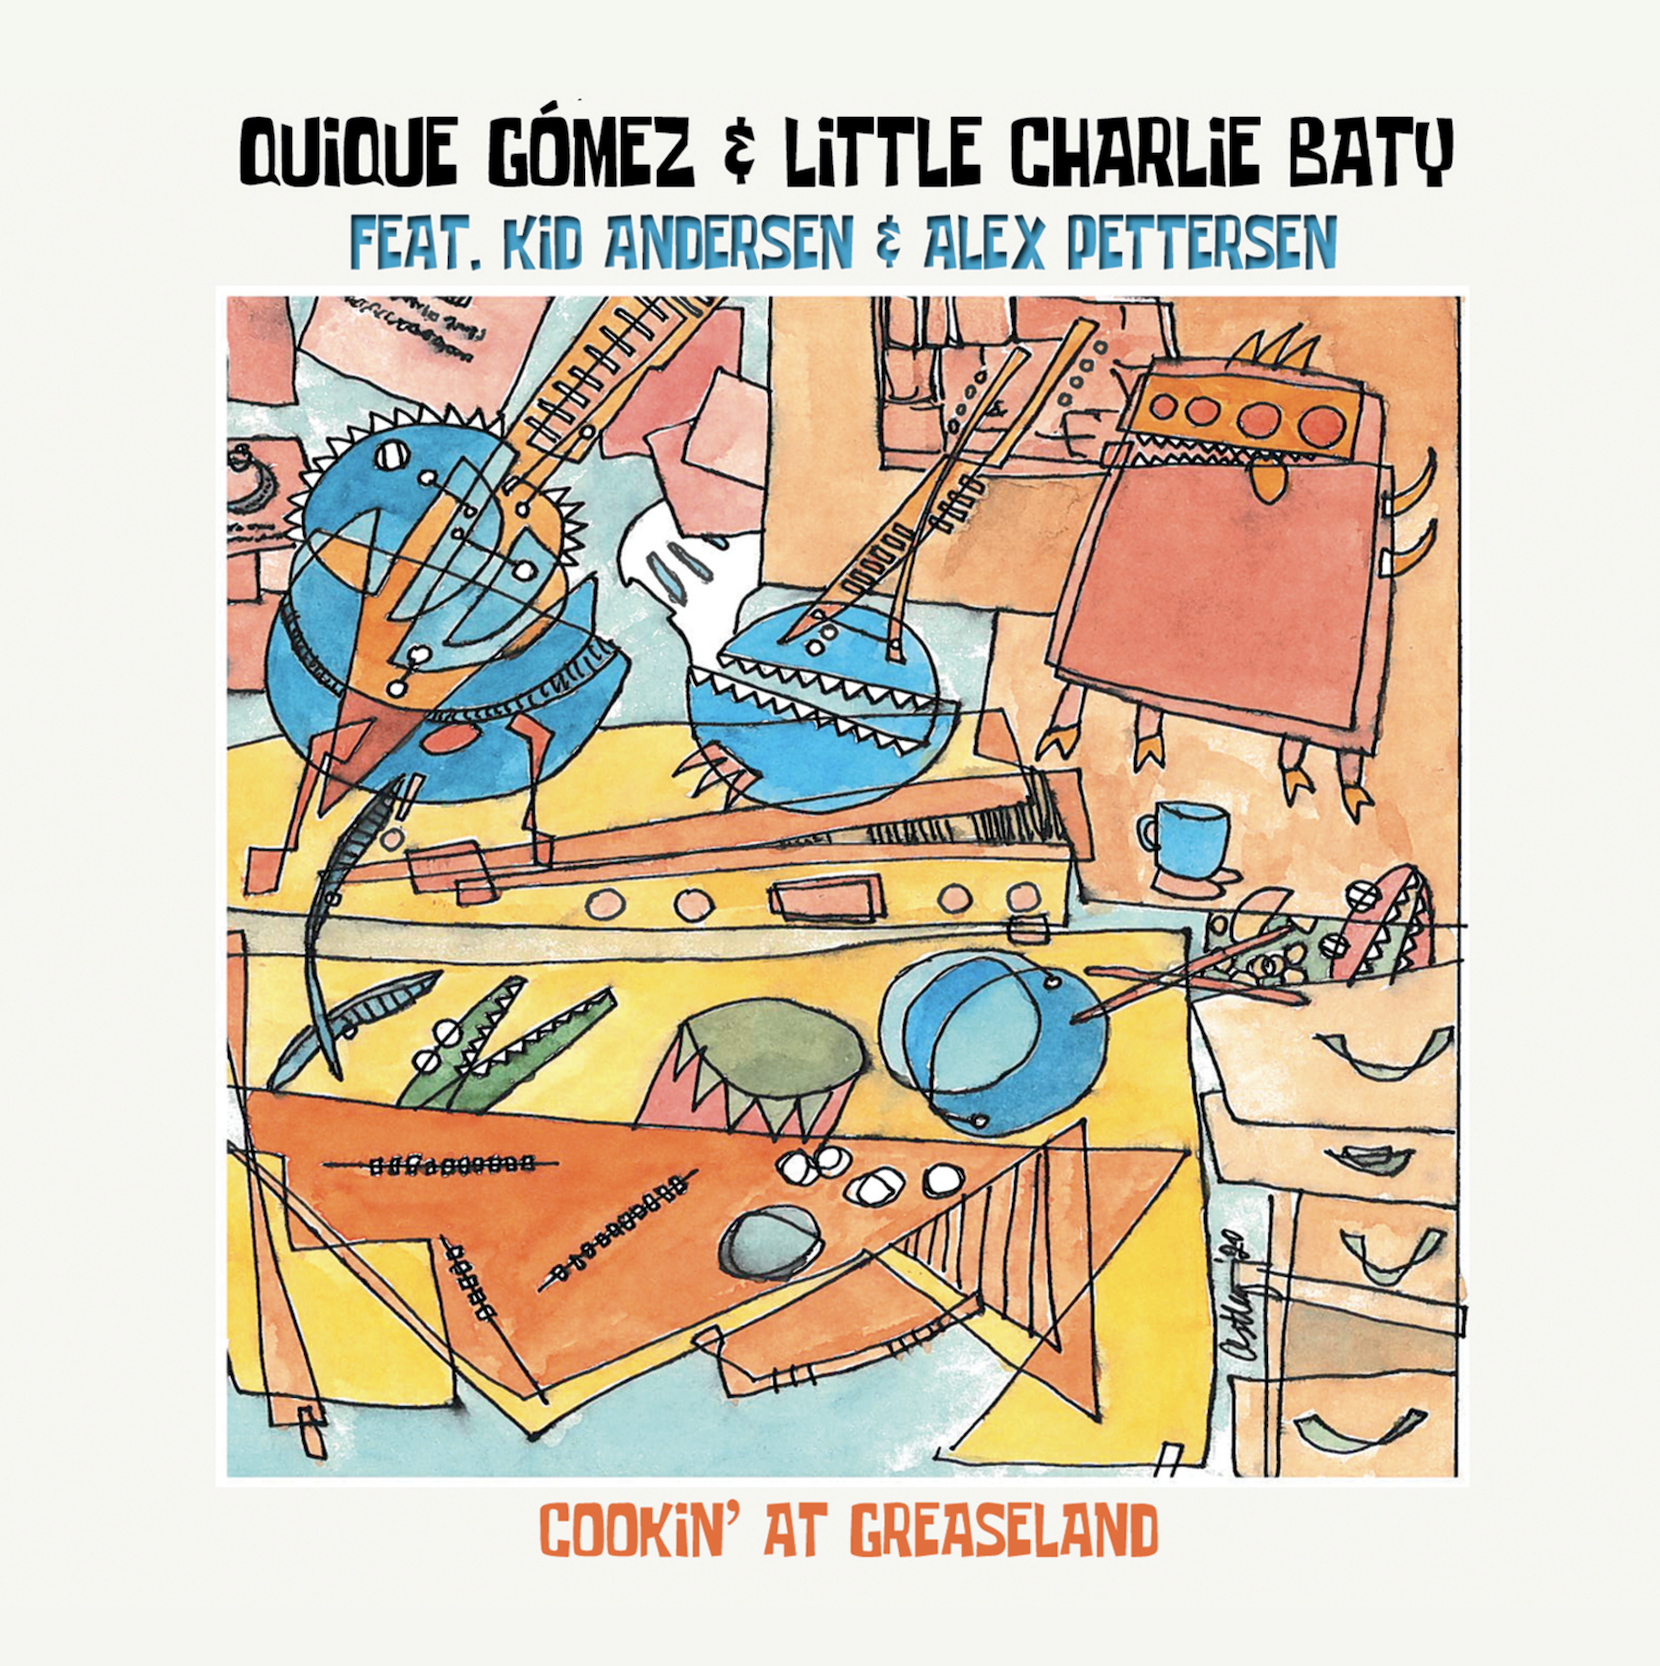 Quique Gomez and Little Charlie Baty Serve Up a Musical Feast on New Album “Cookin' At Greaseland"